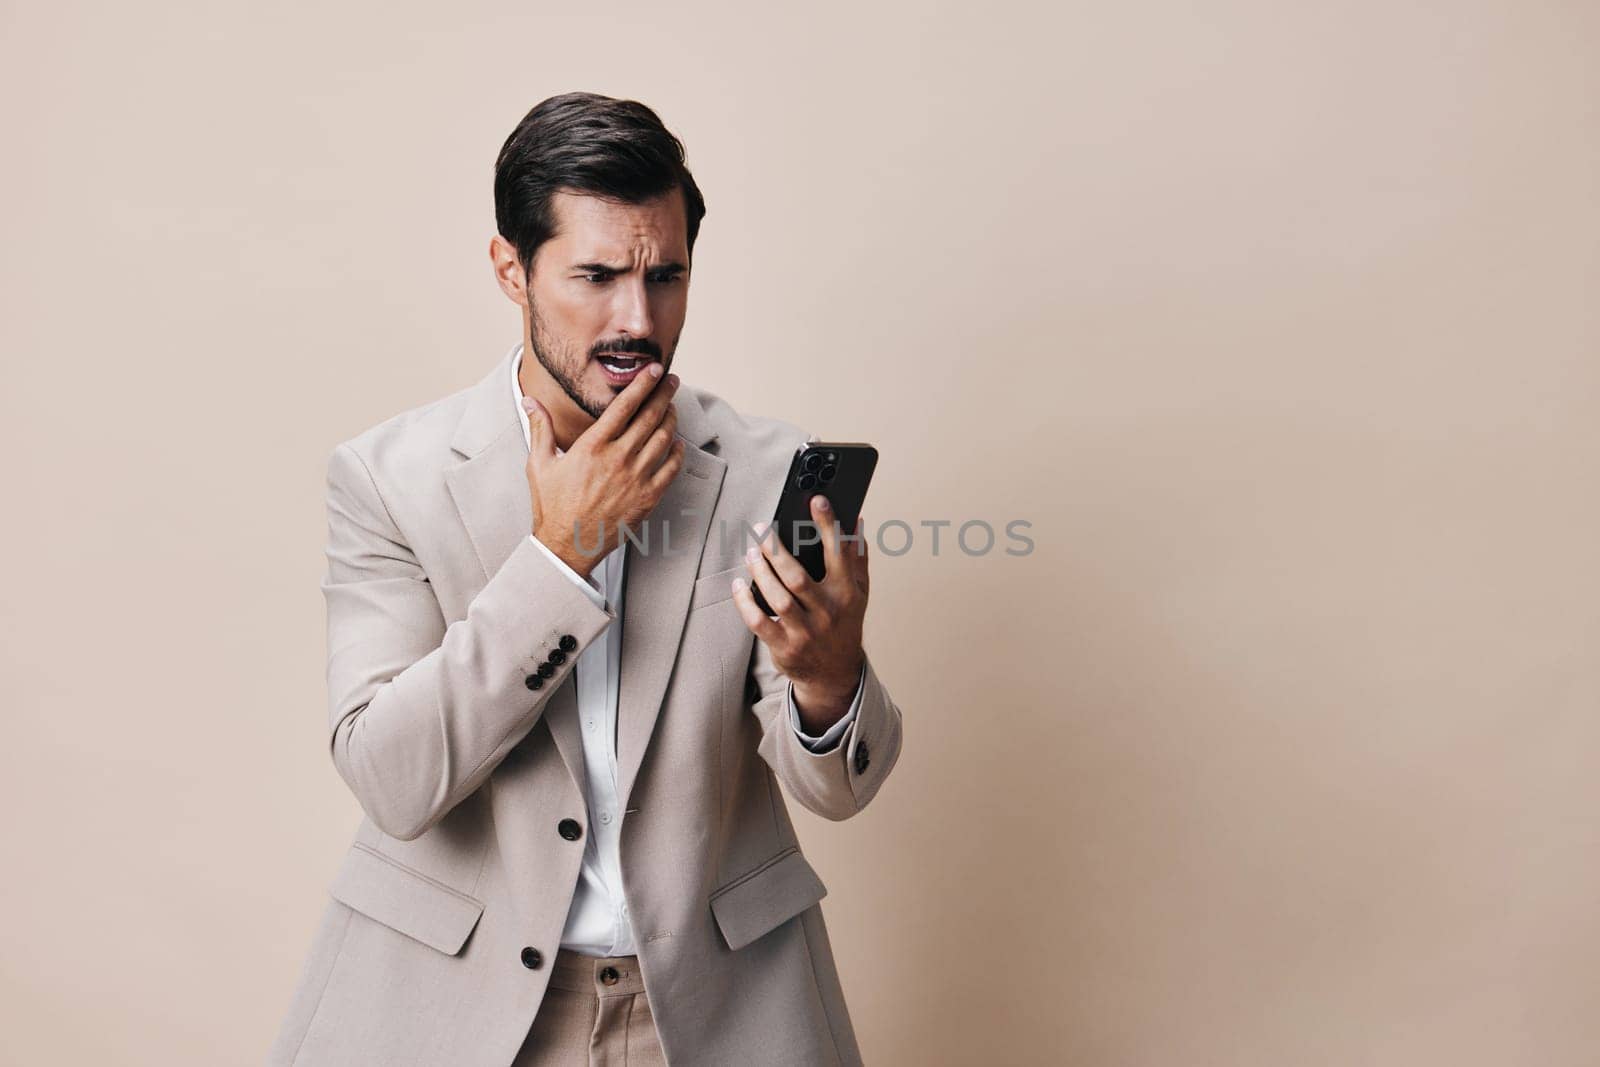 isolated man male handsome portrait online trading smile hold background lifestyle phone happy cellphone call suit entrepreneur business selfies message smartphone